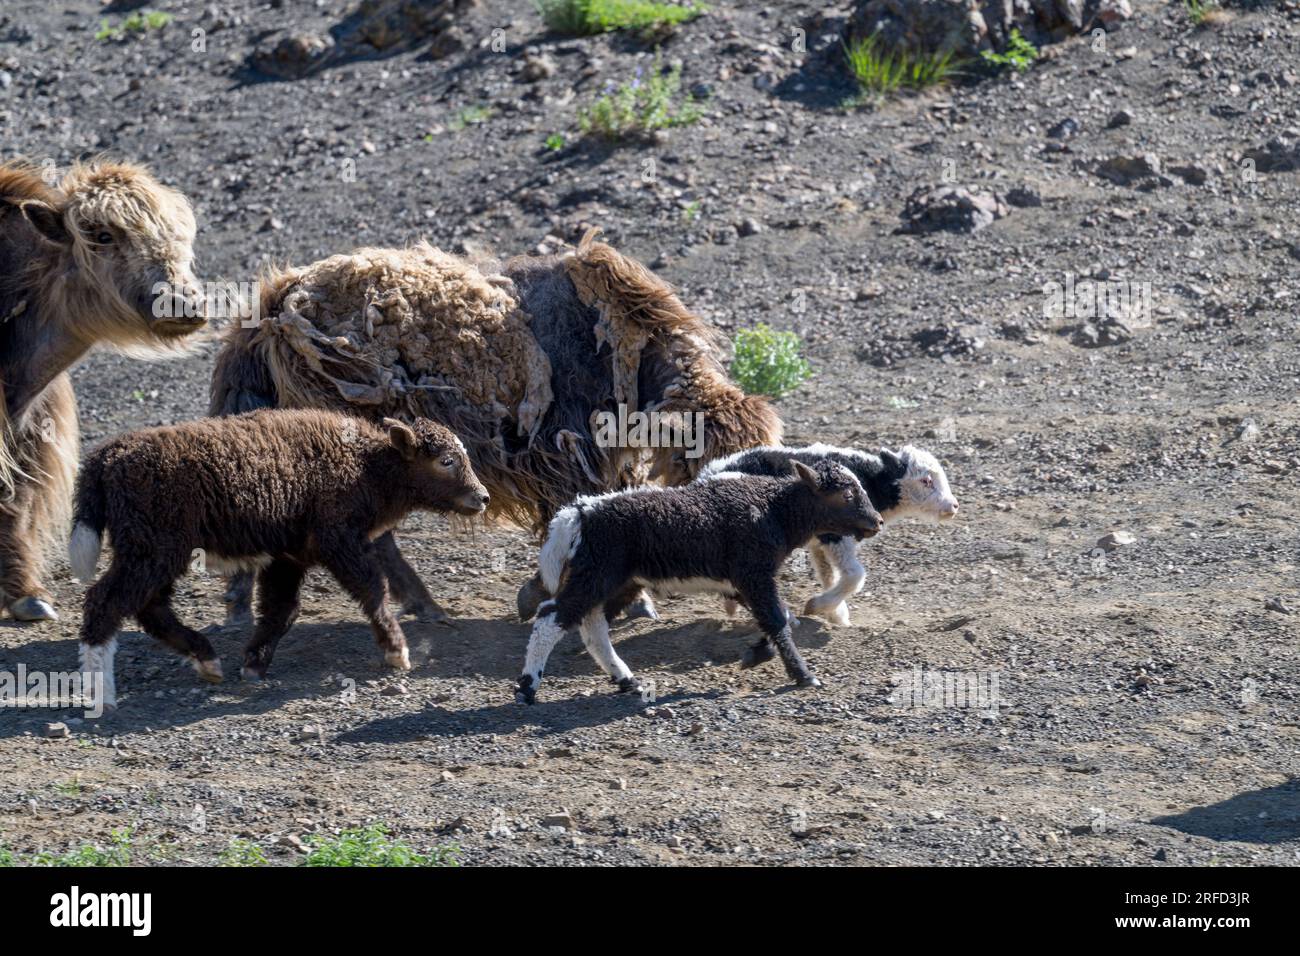 Yak mothers and babies in the Yolyn Am (Gurvan Saikhan National Park), a deep and narrow gorge in the Gurvan Saikhan Mountains near Dalanzadgad in the Stock Photo